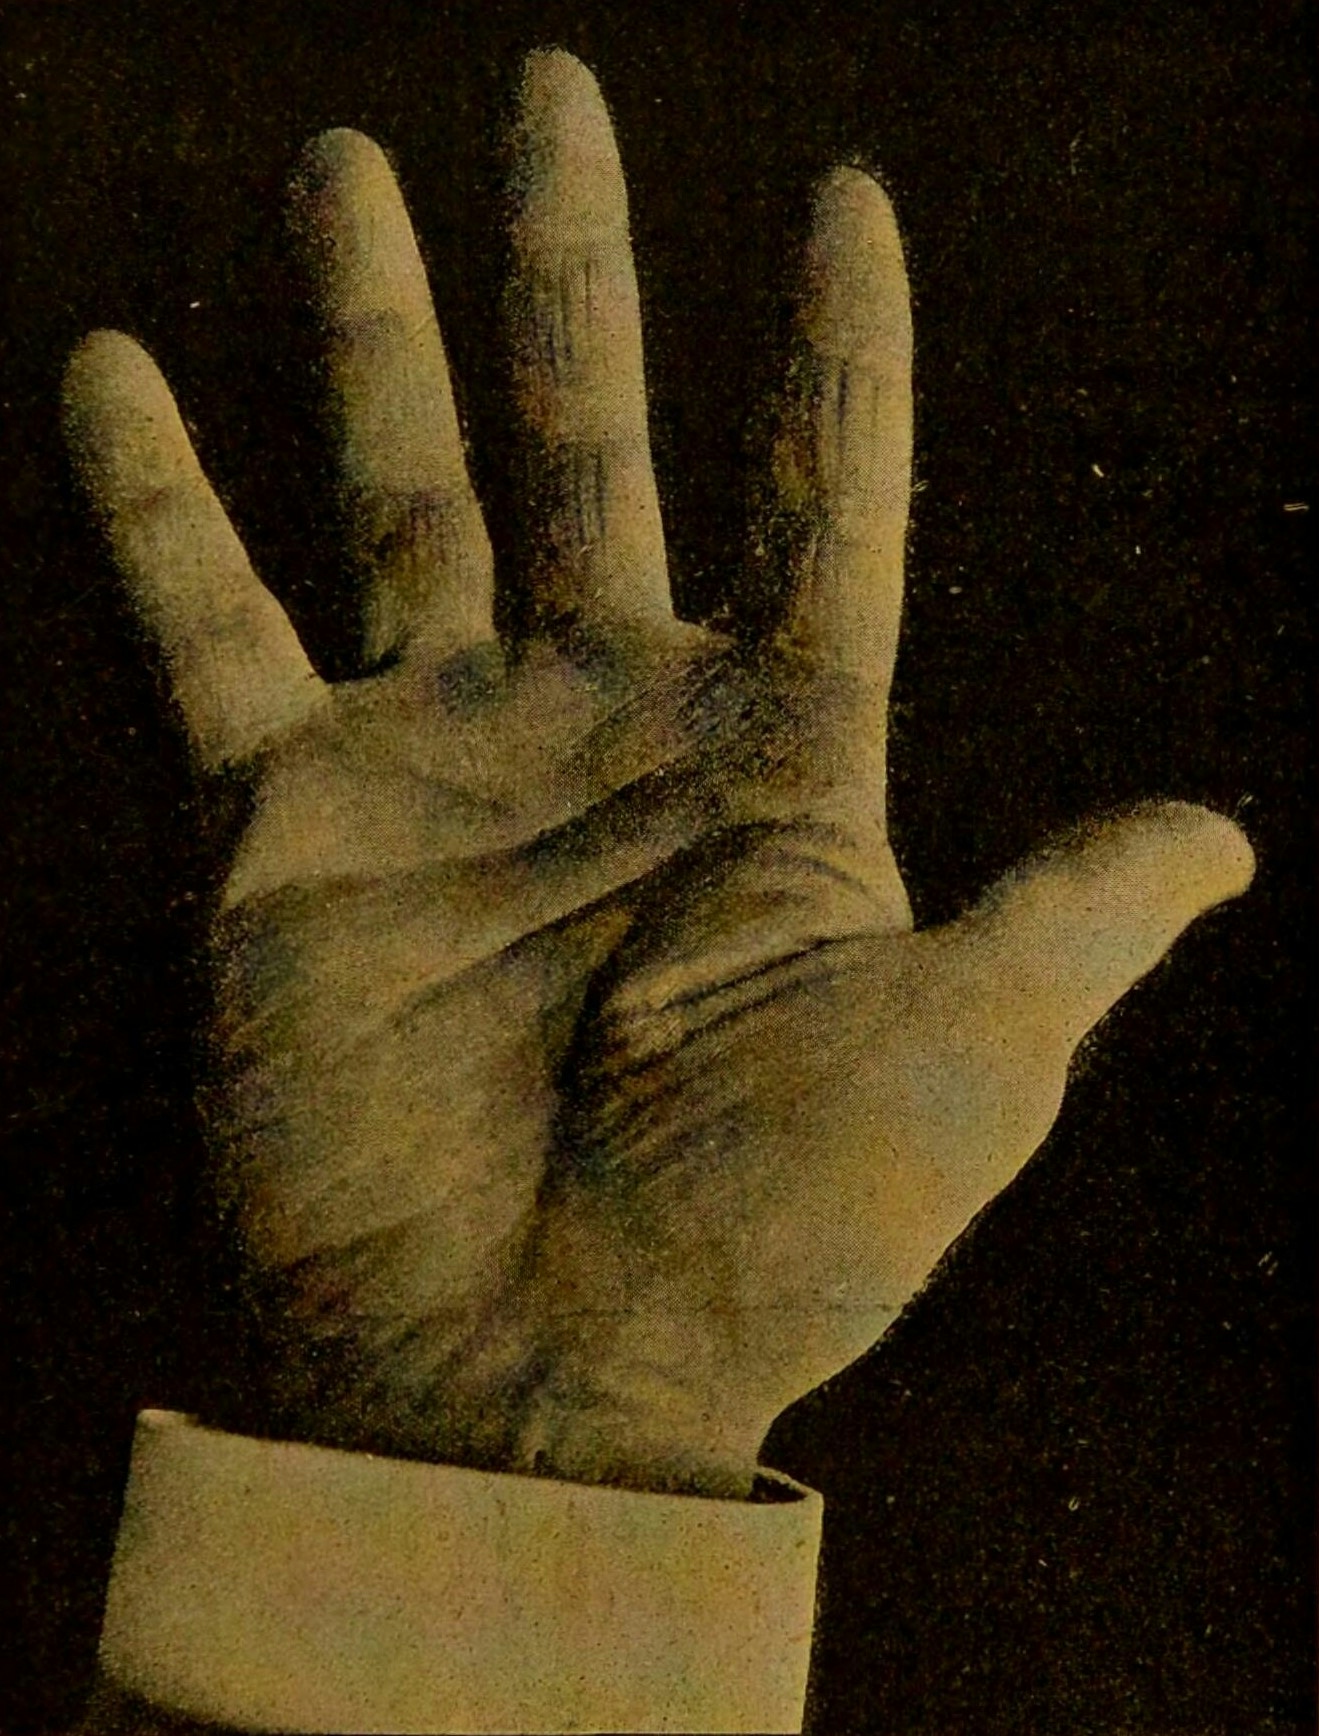 Black and white photo of Emile Zola’s hand.